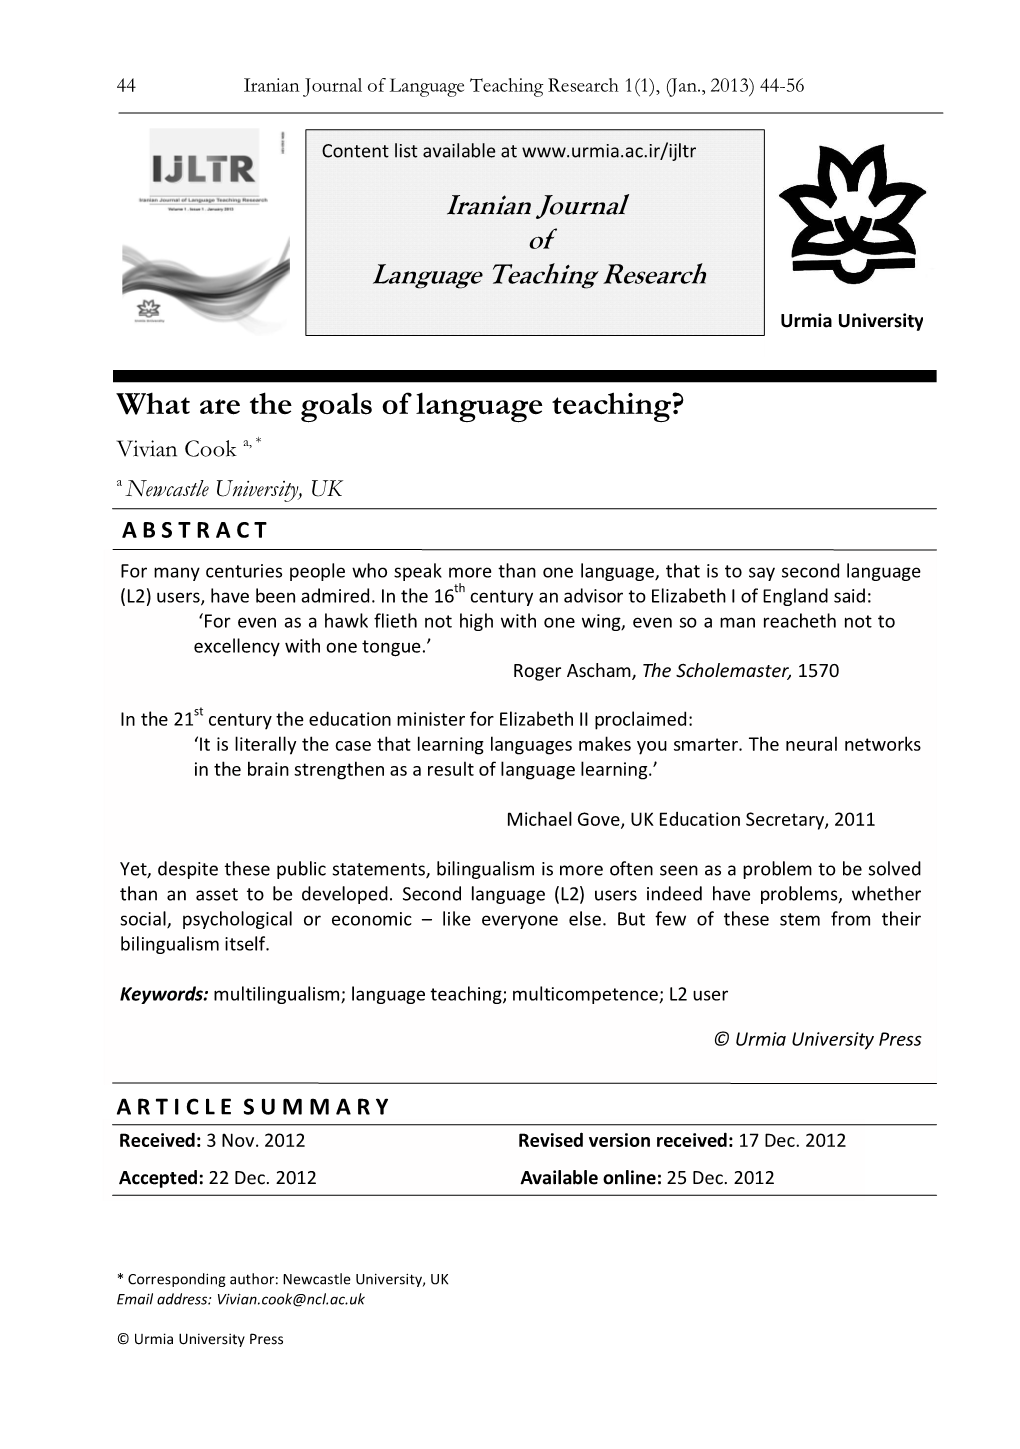 What Are the Goals of Language Teaching?